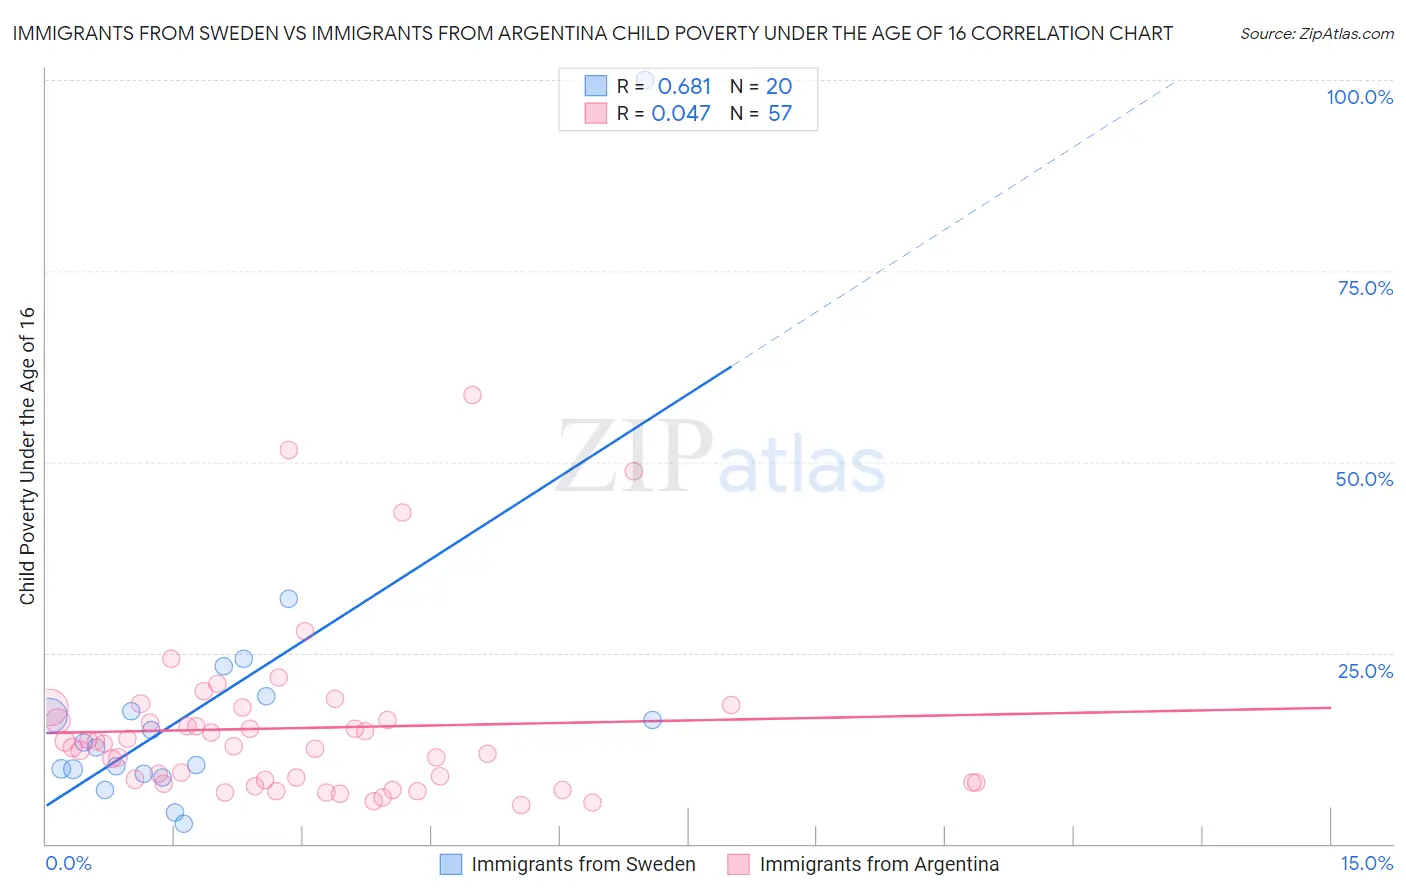 Immigrants from Sweden vs Immigrants from Argentina Child Poverty Under the Age of 16